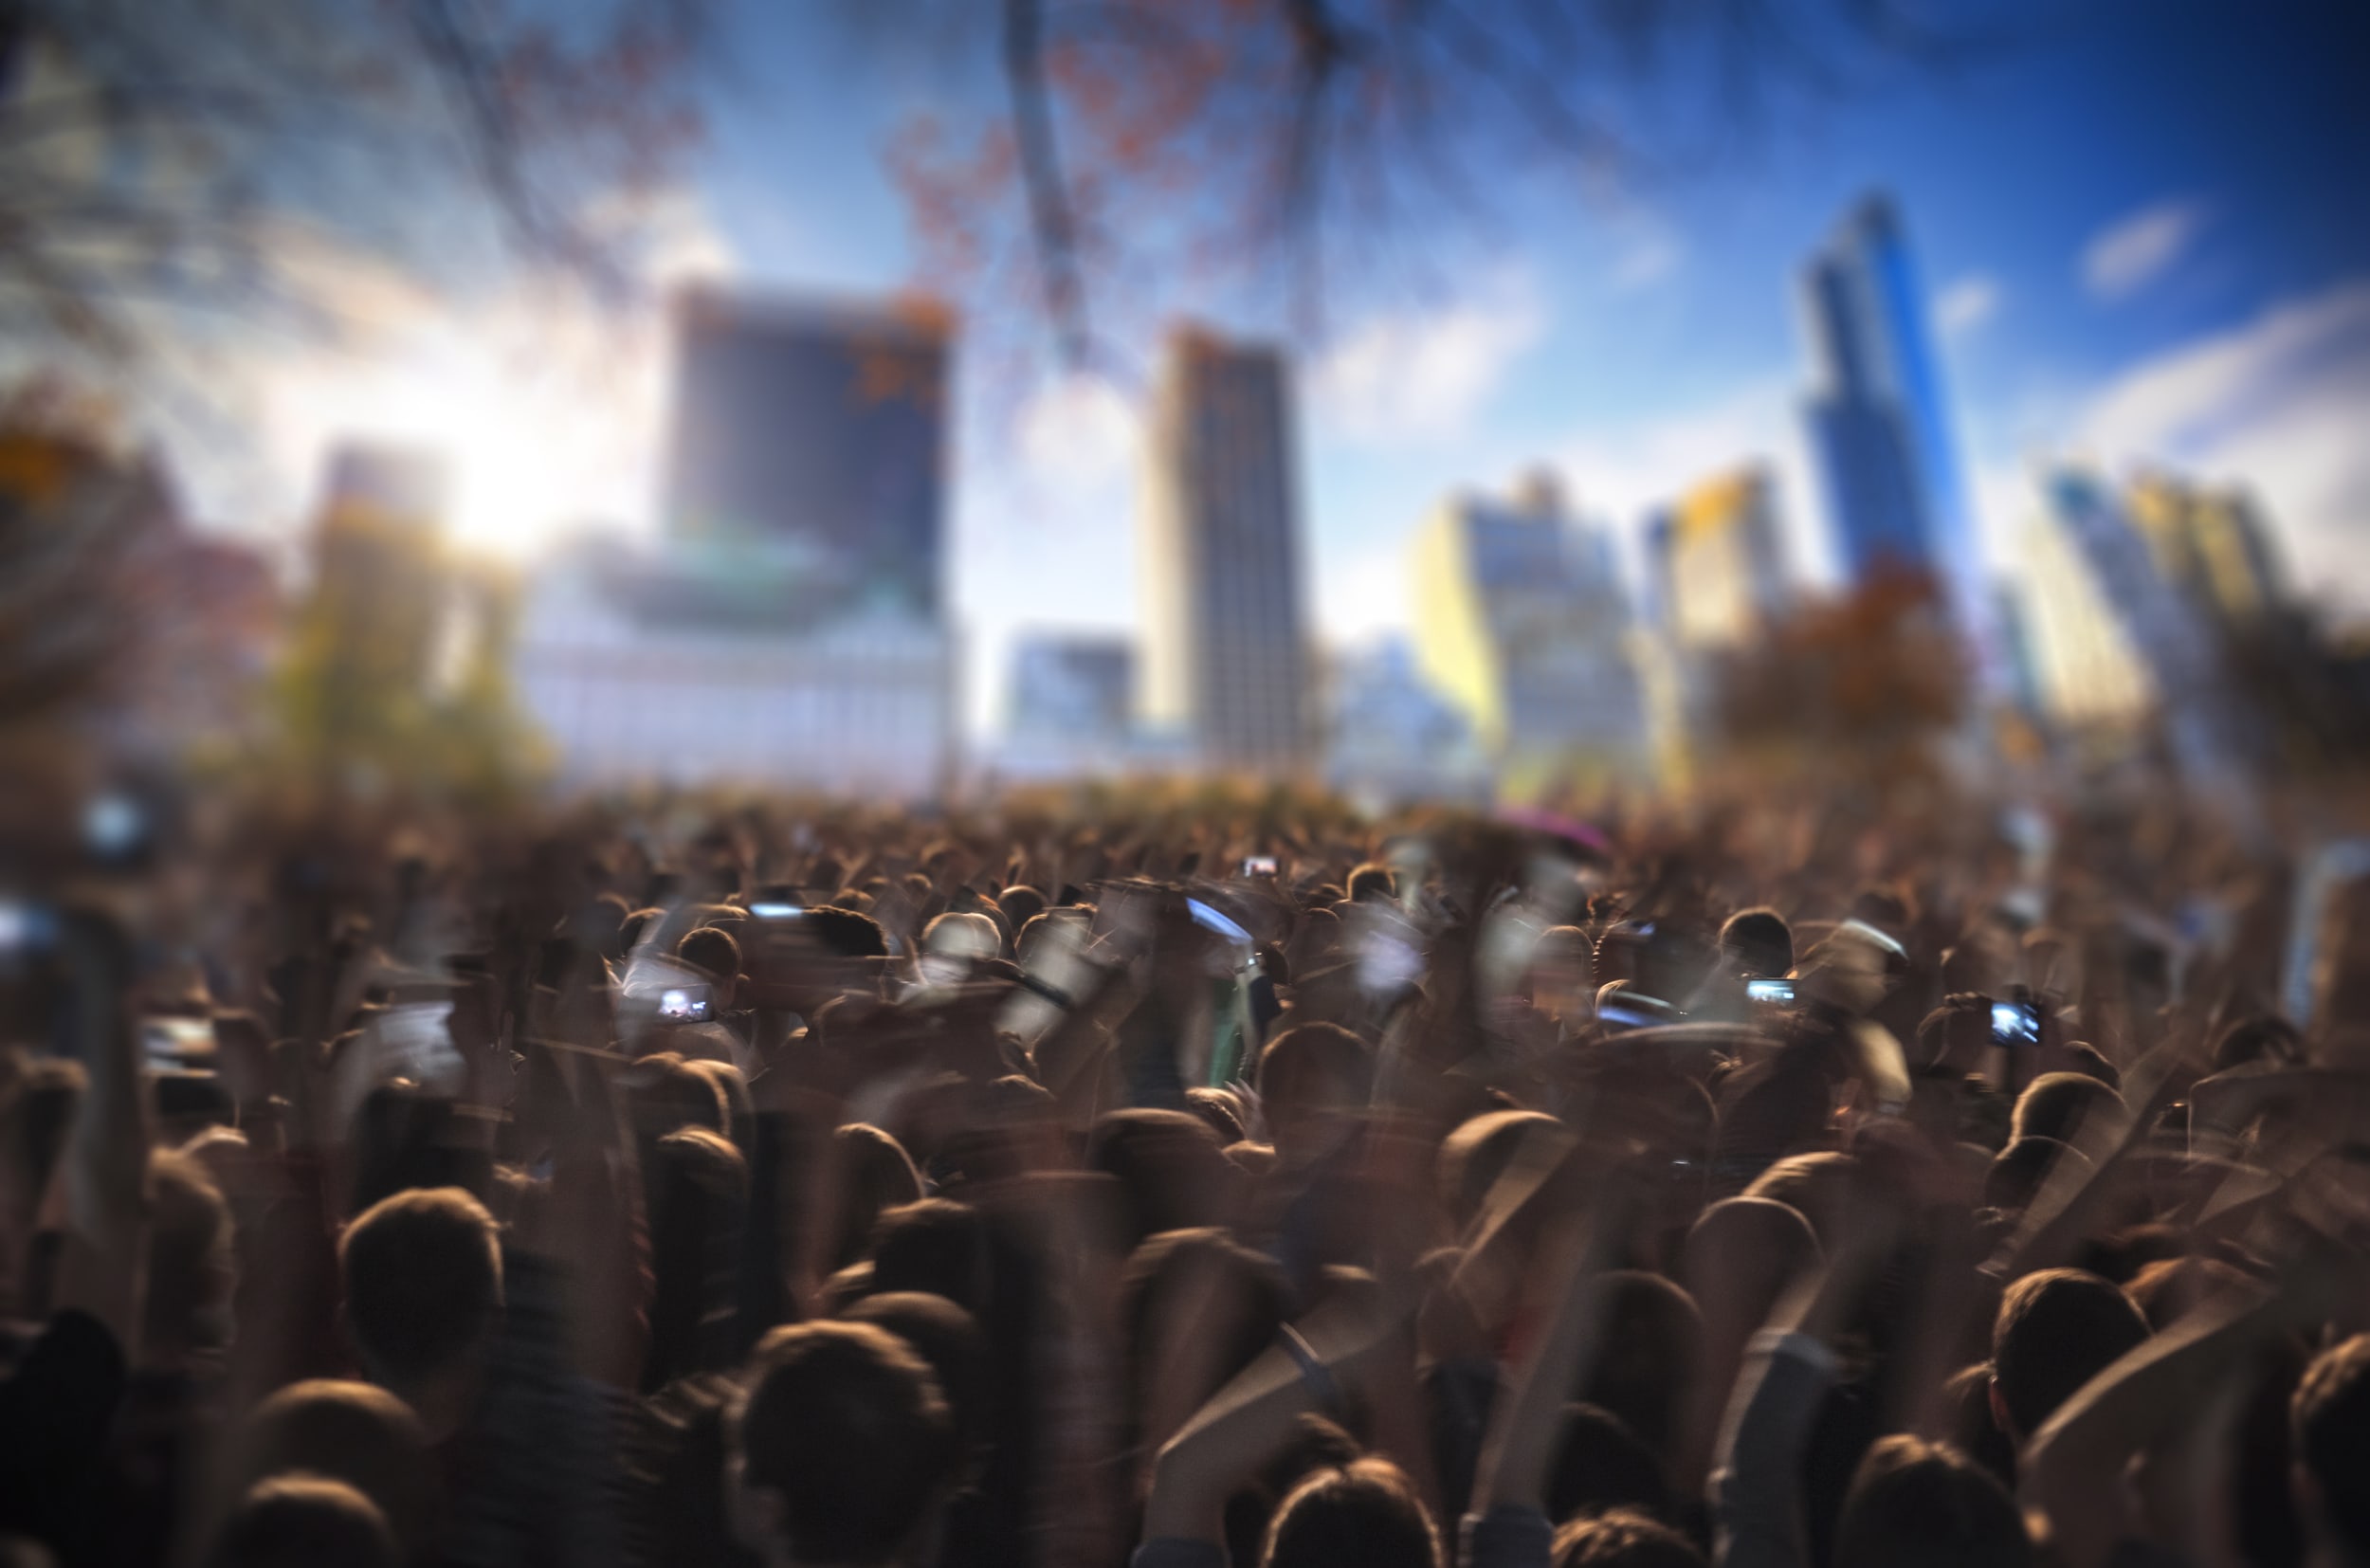 Outdoor concert in new york, crowd in focus dancing and singing, with the new york skyline out of focus in the background